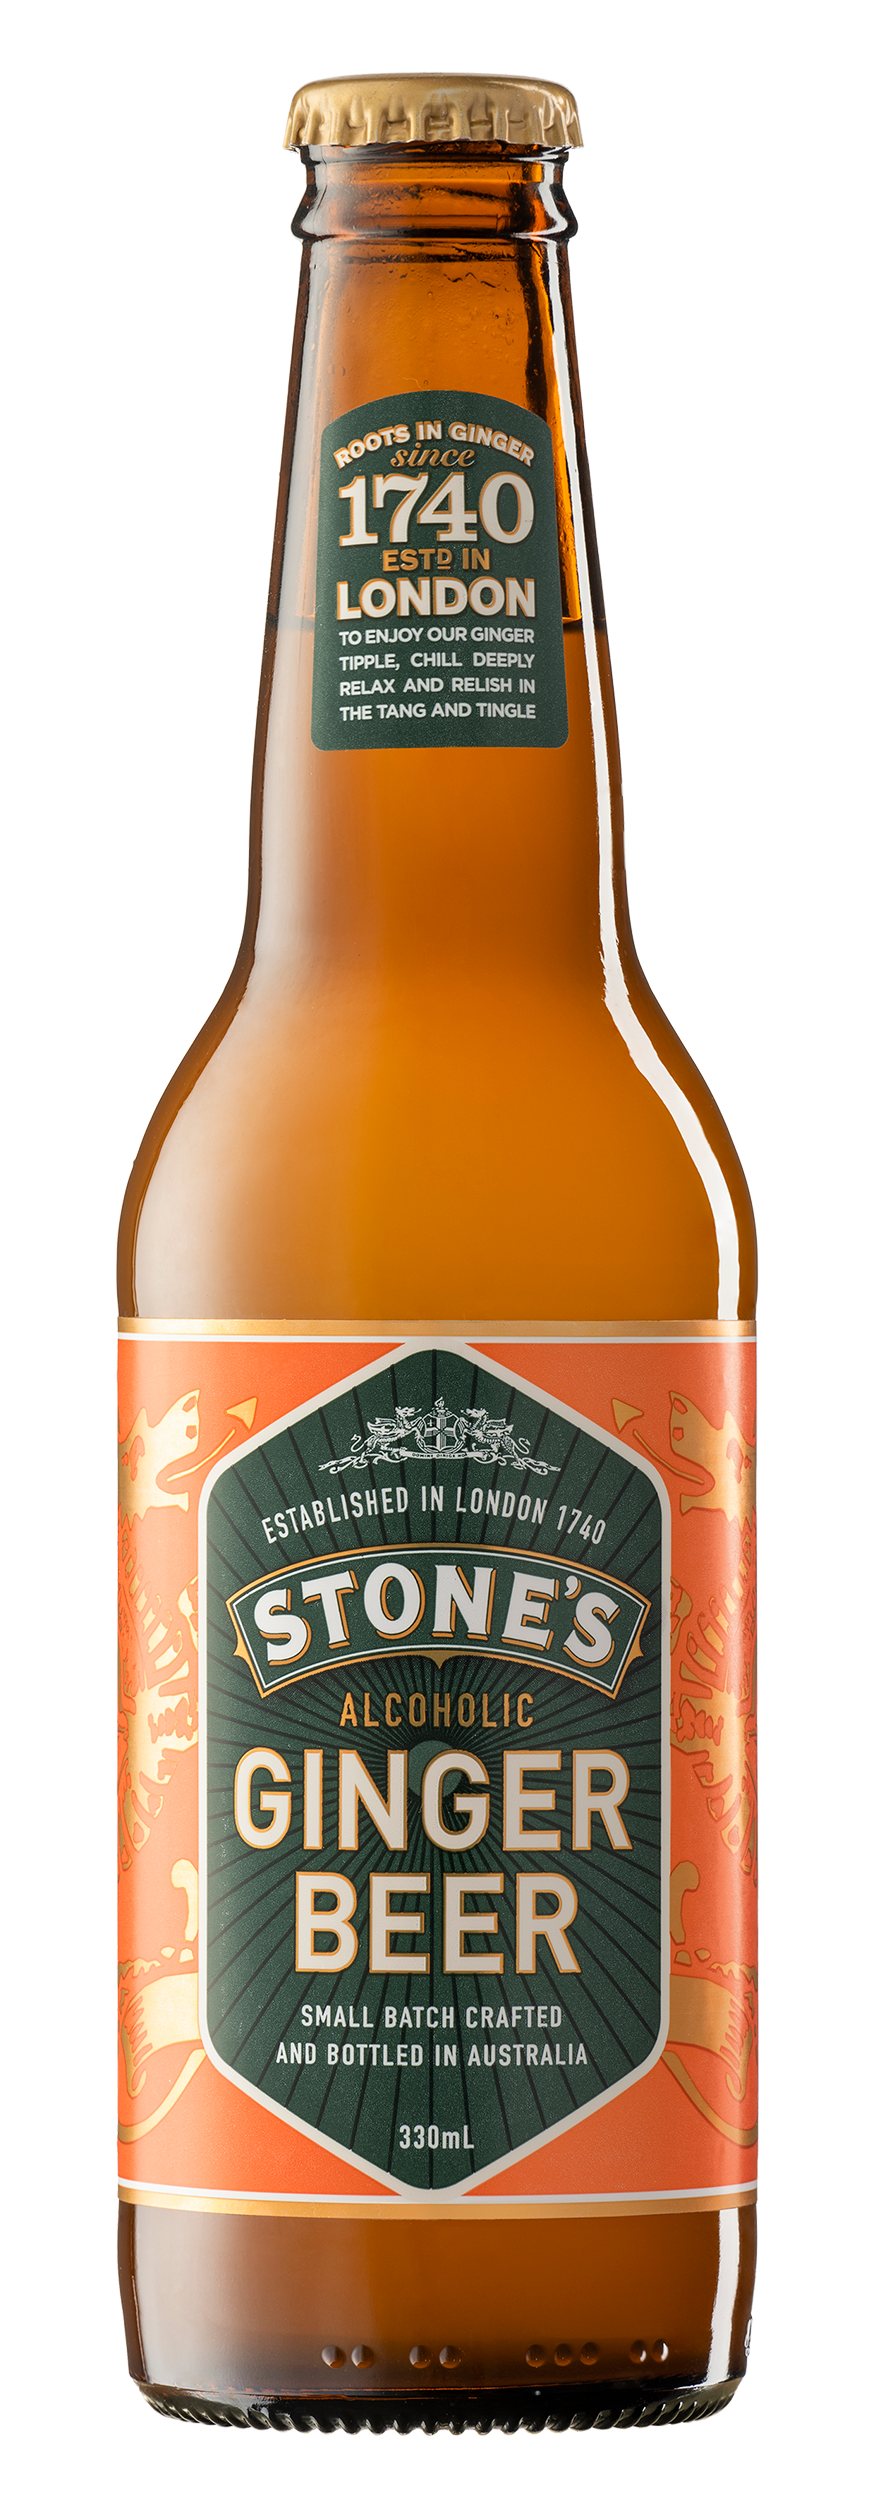 Stone's Alcoholic Ginger Beer